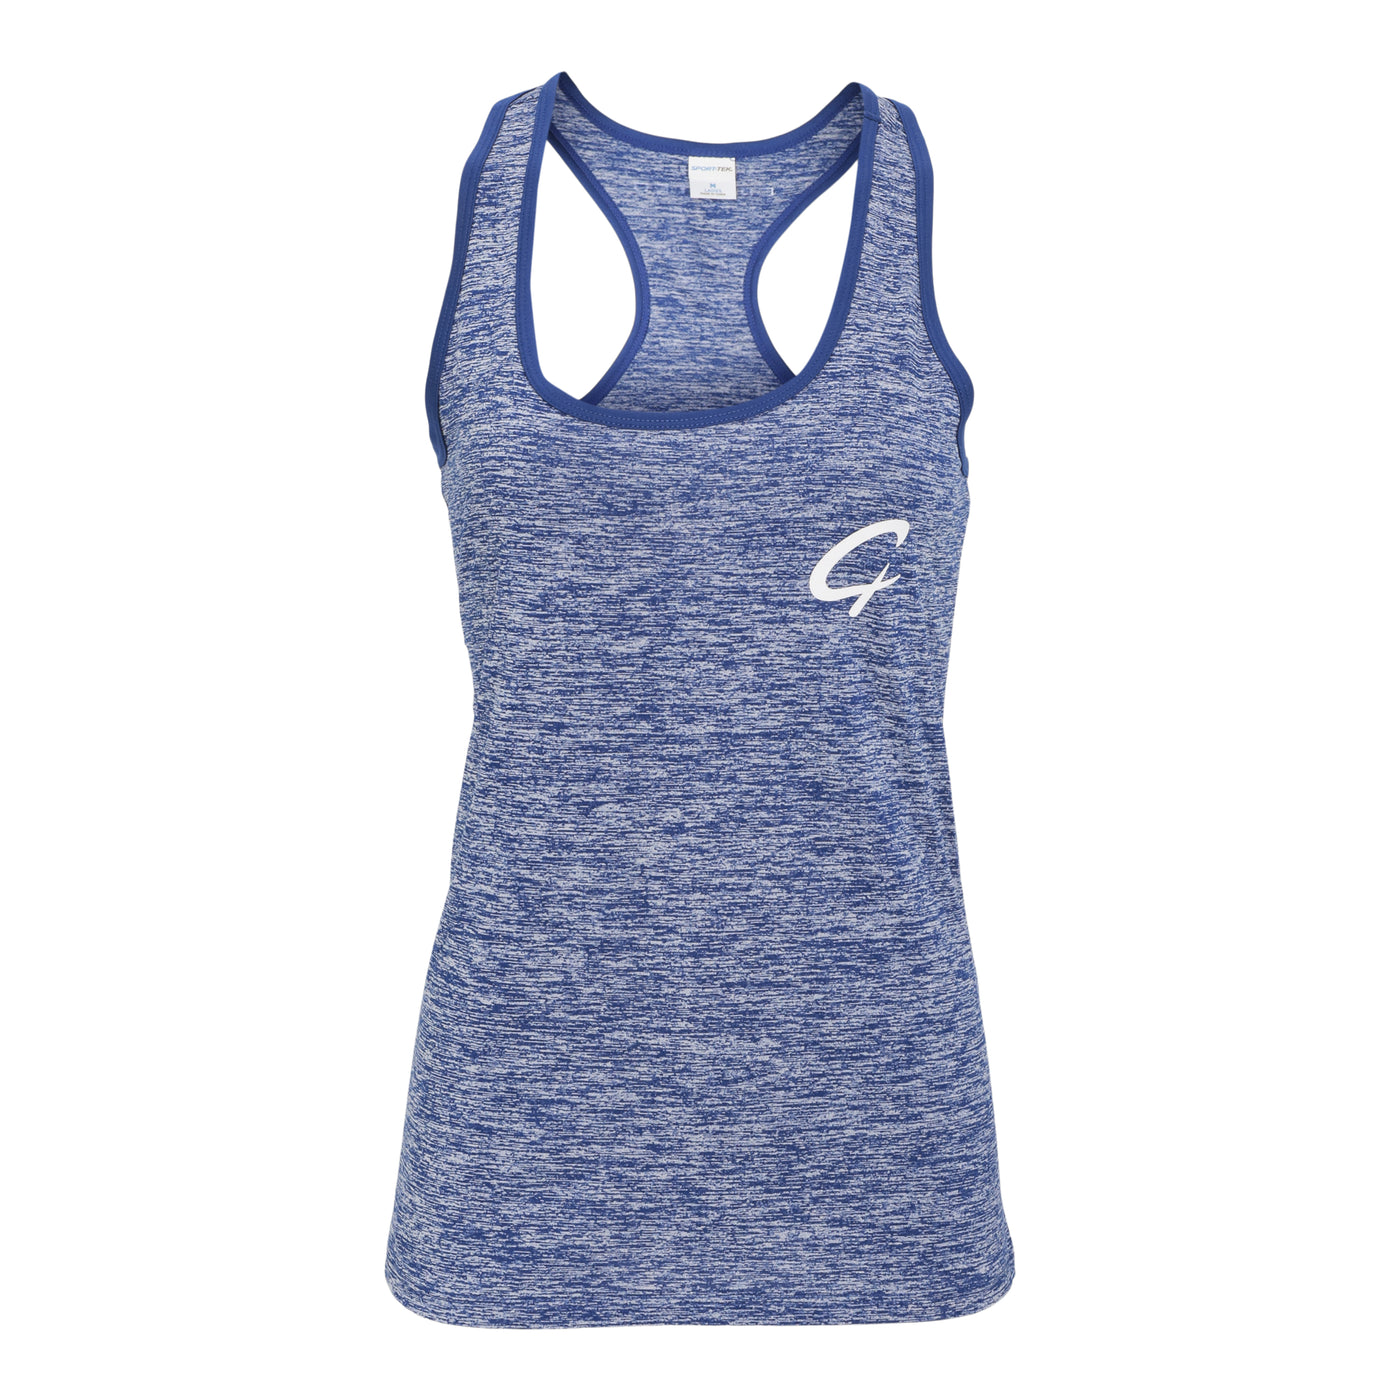 Created Women's Charged ice blue tank top alternate front view